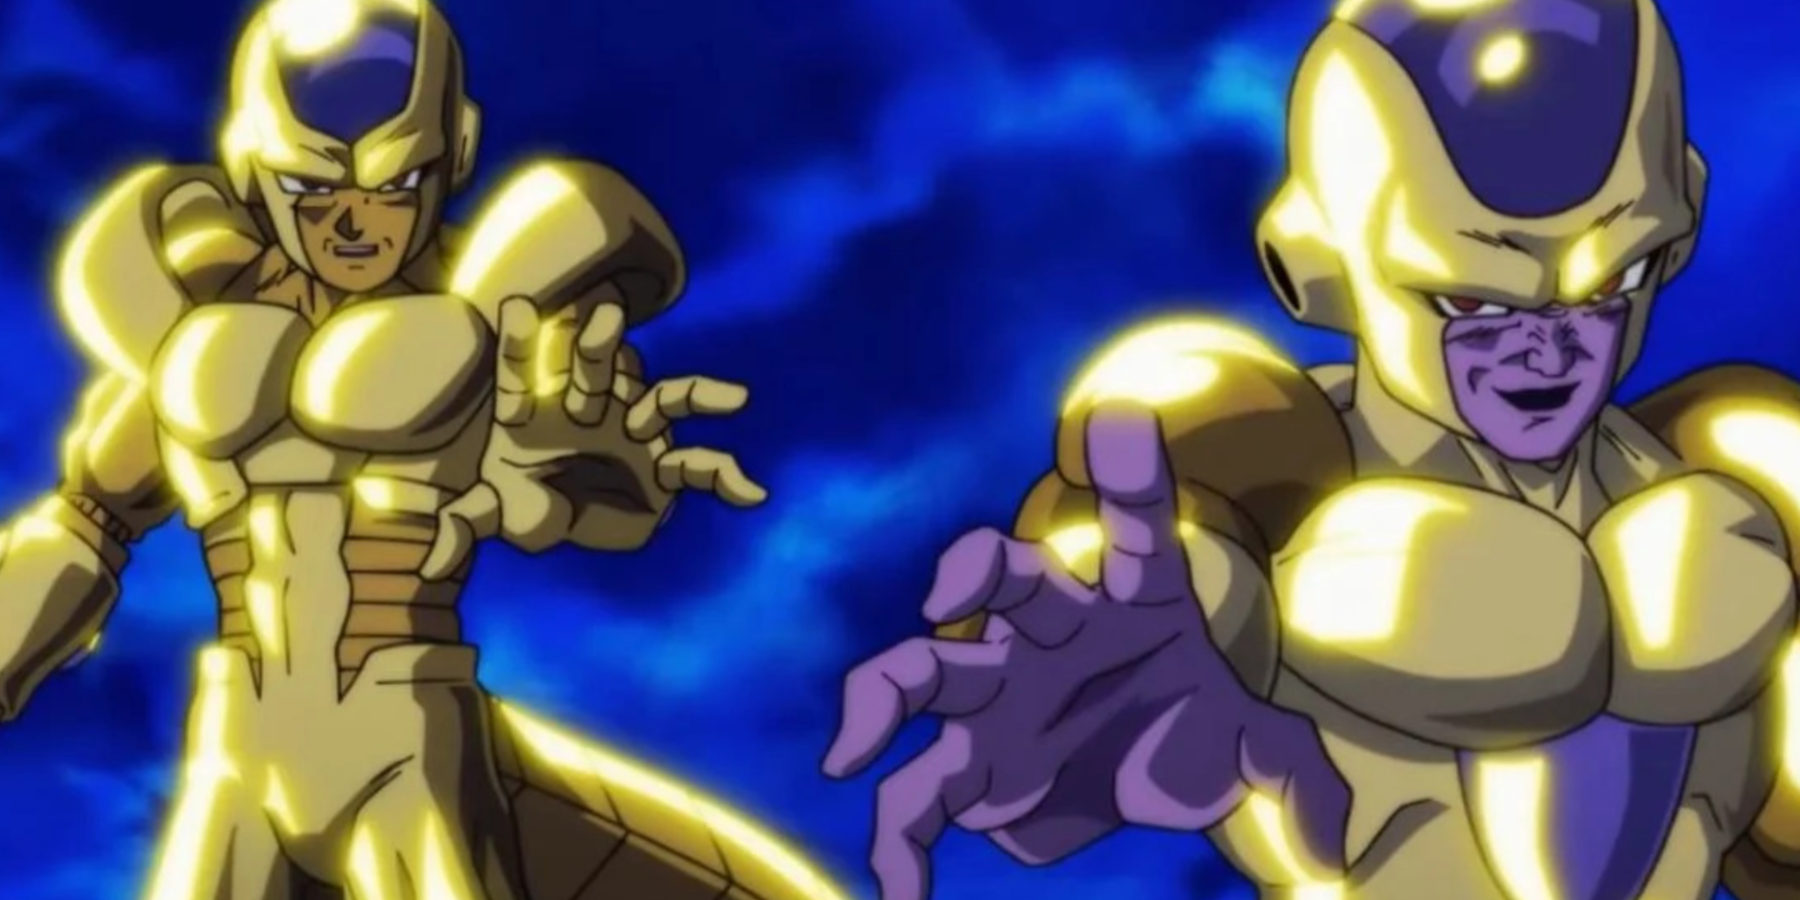 Golden Frieza and Golden Cooler from Super Dragon Ball Heroes 